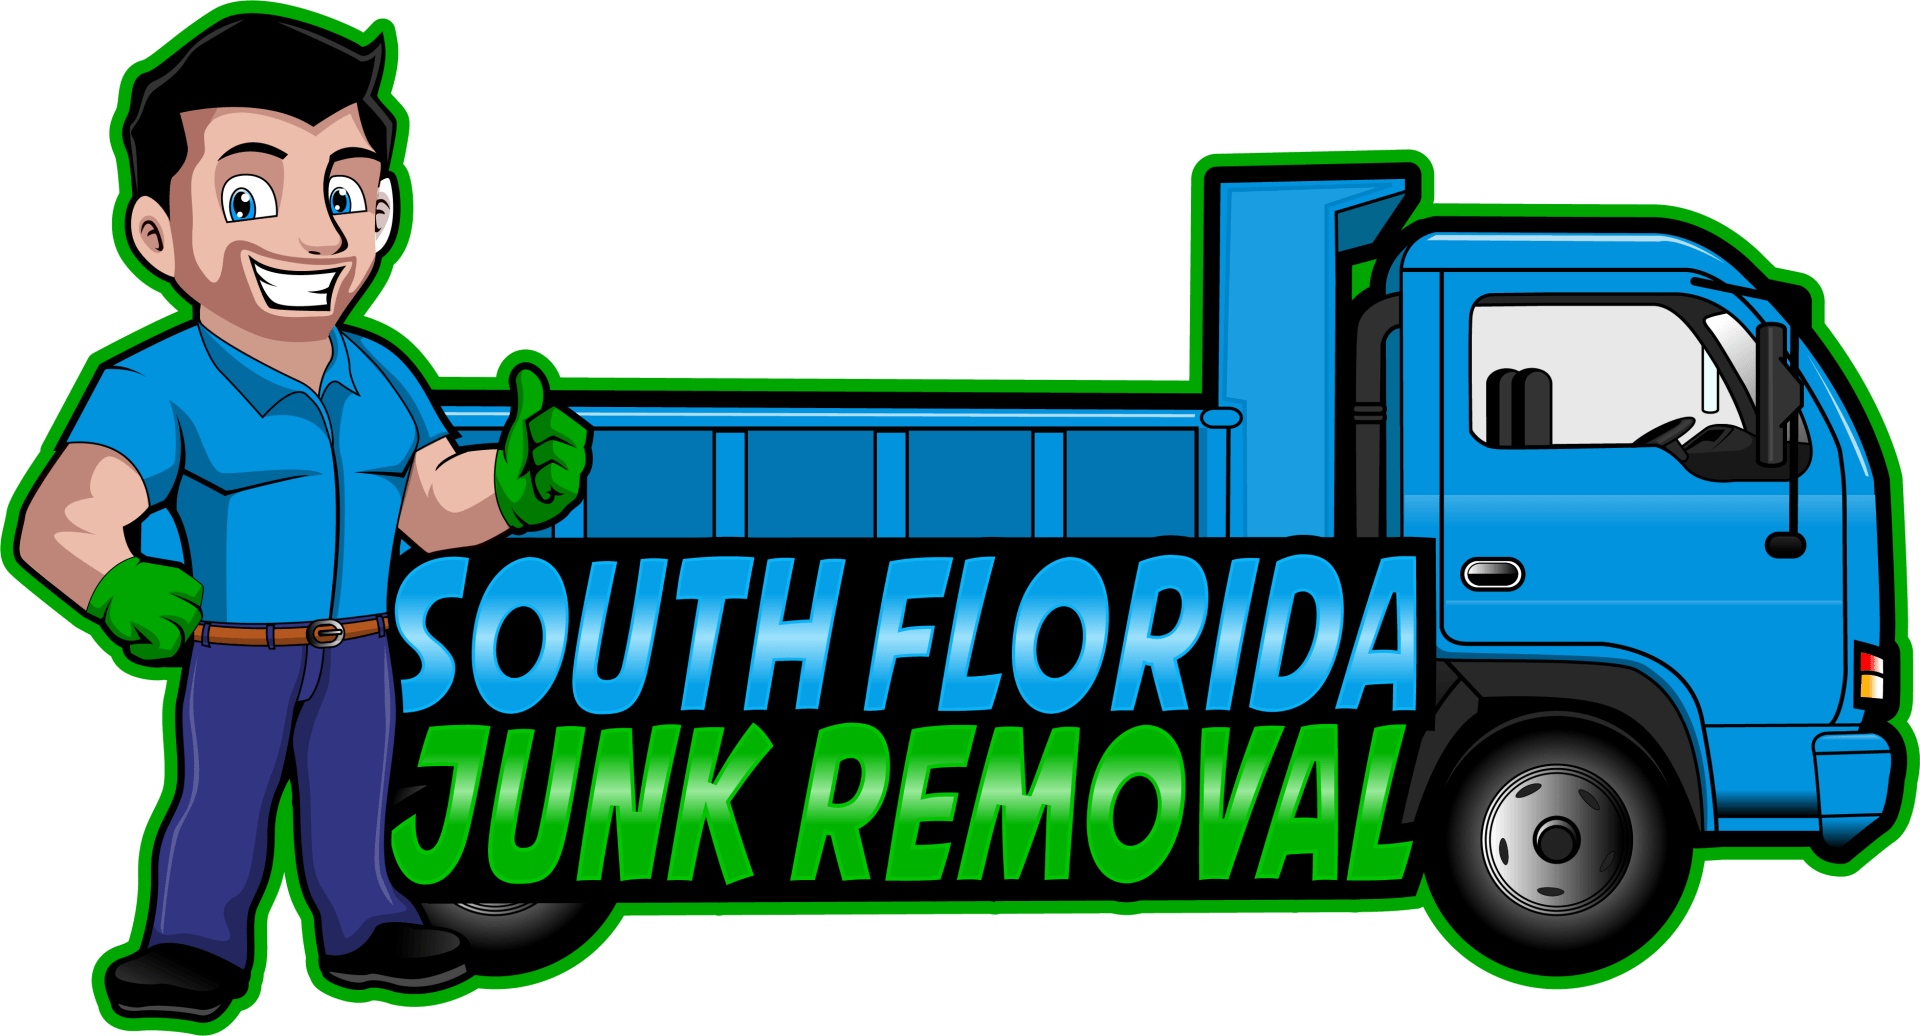 South Florida Junk Removal